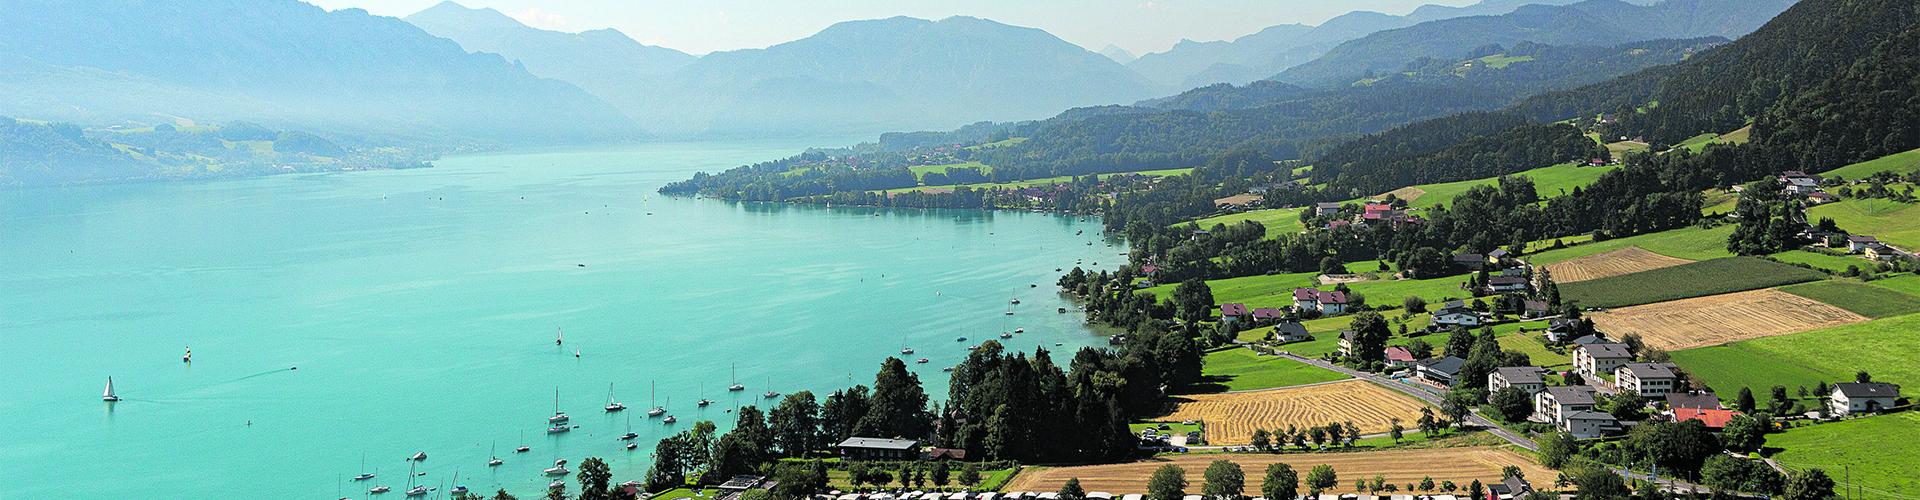 Gemeindeamt Nussdorf am Attersee cover